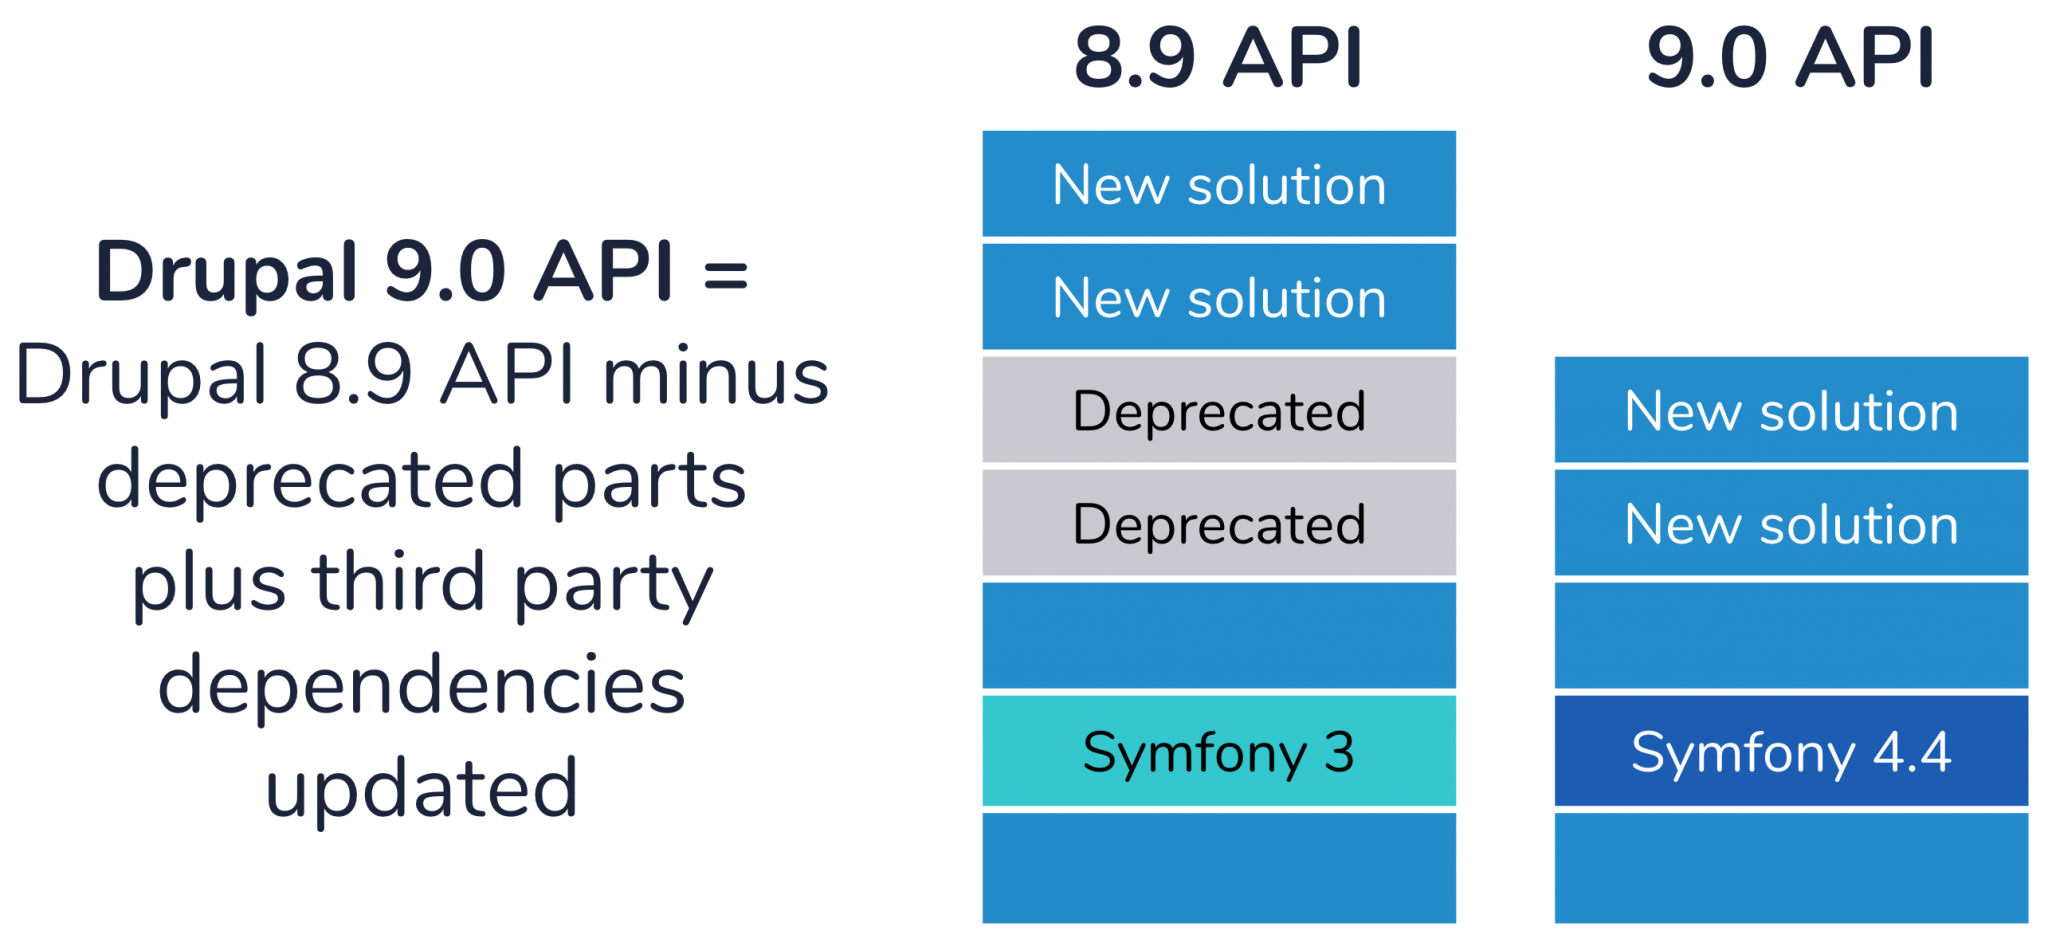 Drupal 9.0 API equals Drupal 8.9 API minus deprecated parts plus third party dependencies updated. The image shows blocks for version 8.9 API and version 9.0 API. In the 9.0 API the deprecated blocks of code are removed and Symfony 3 has been replaced with Symfony 4.4